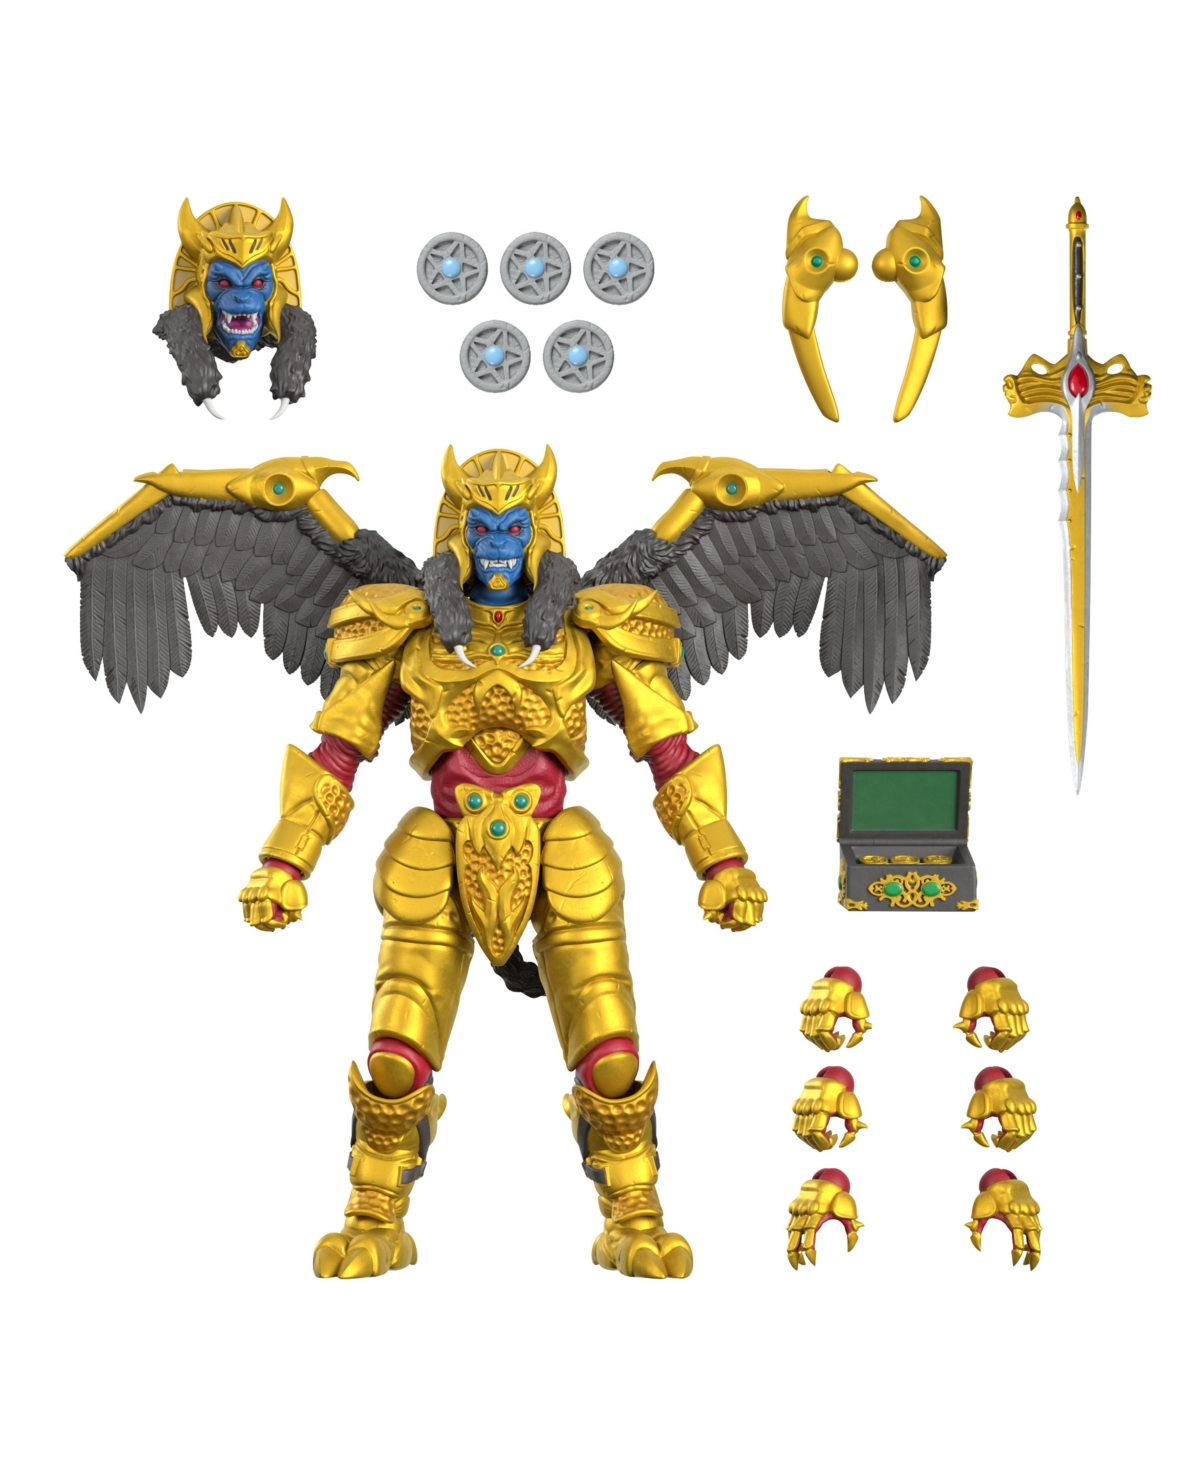 Super 7 Mighty Morphin Power Rangers Goldar 7" Ultimates, Action Figure In Multi